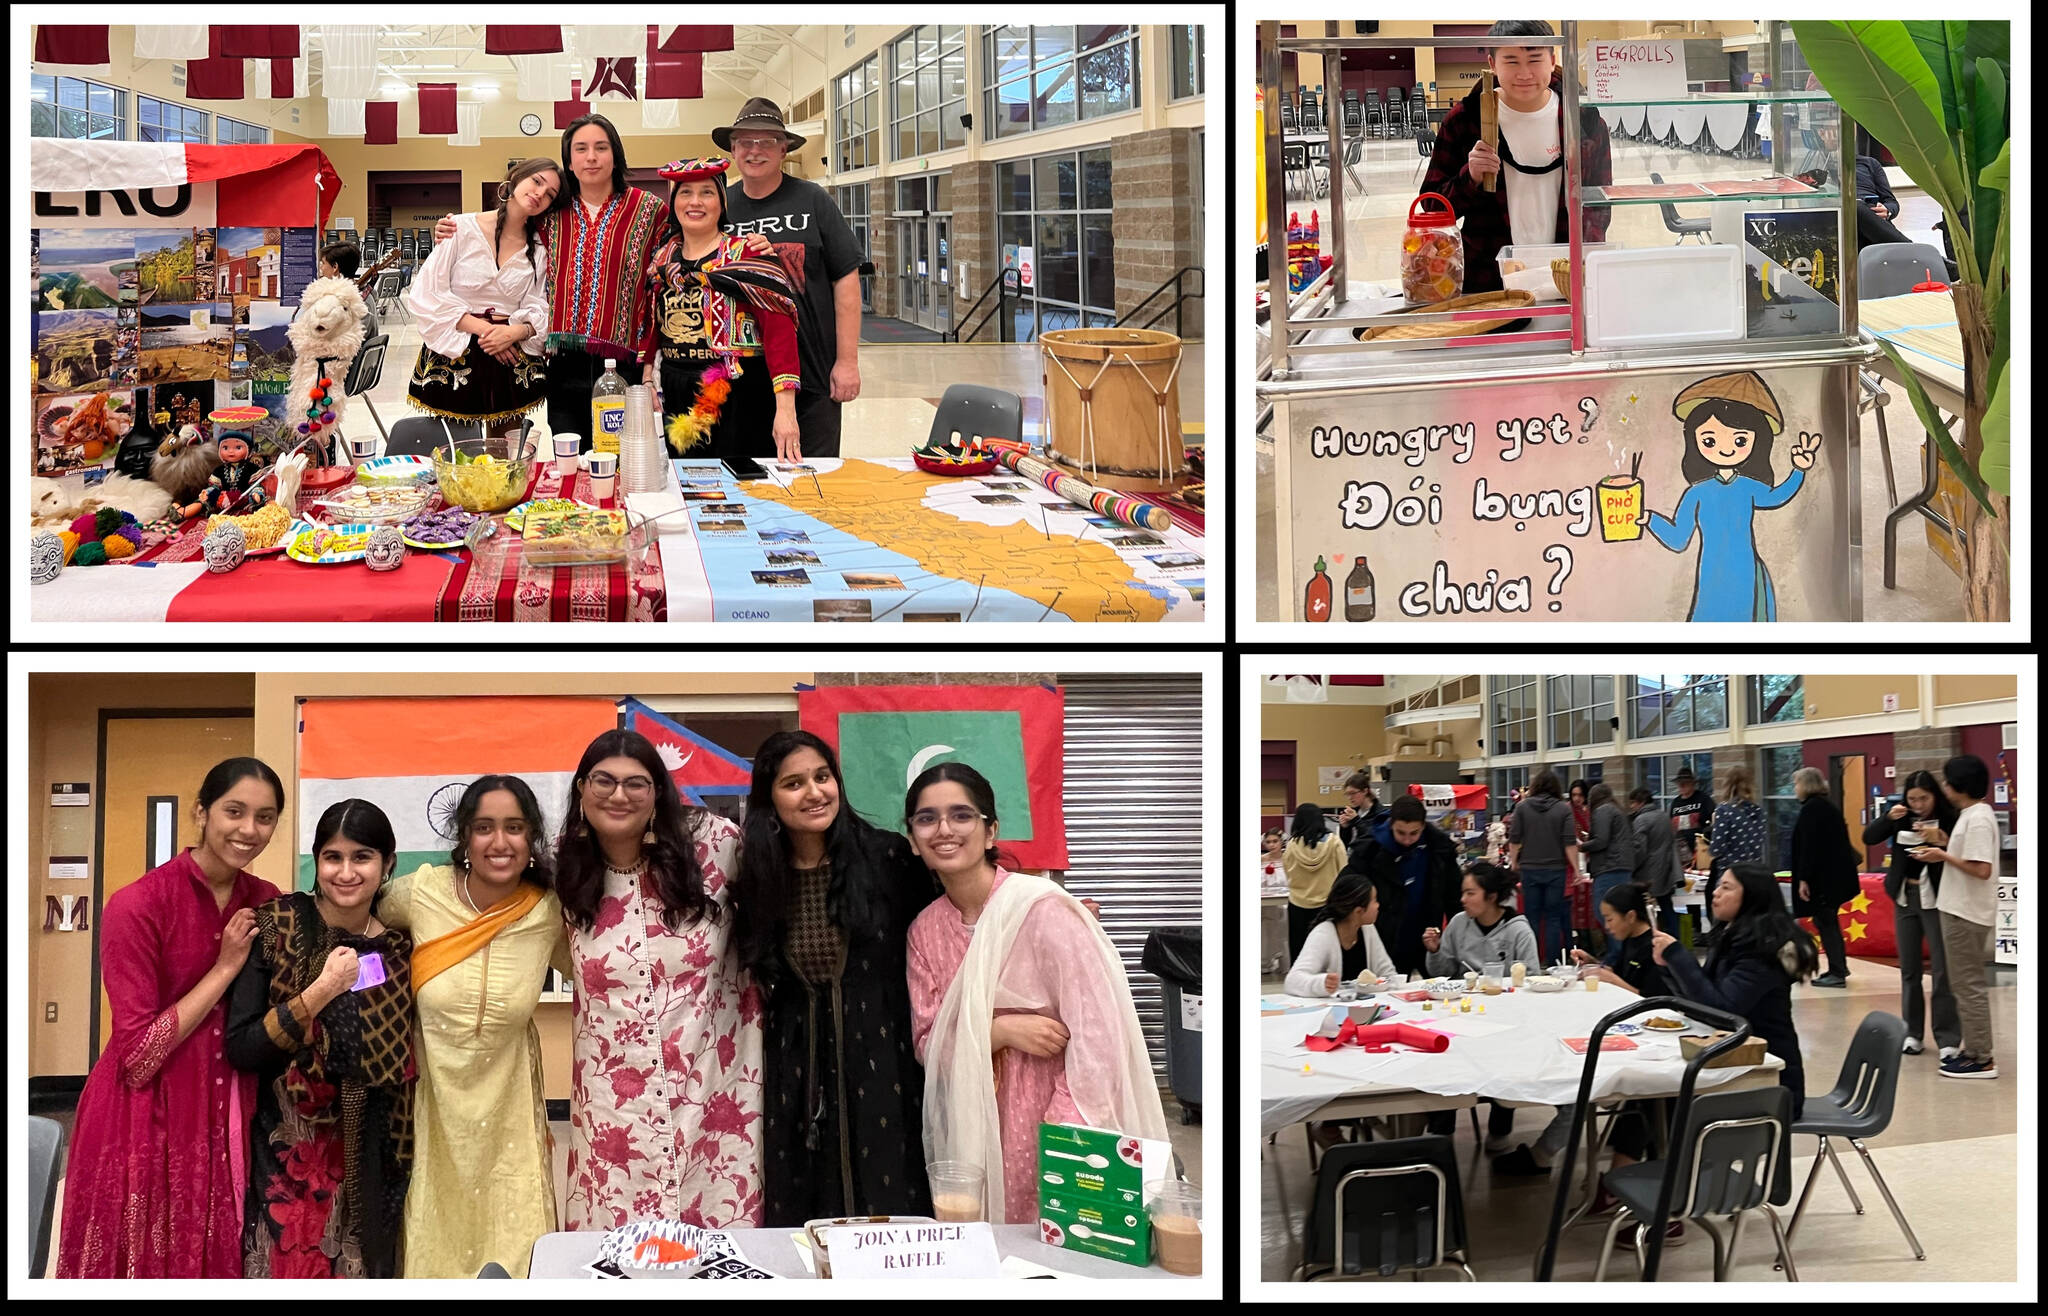 Participants from different cultures shared their stories at last year’s Mercer Island High School Cultural Fair. This year’s fair will take place from 6-8 p.m. on March 16 in the school commons. Courtesy photos